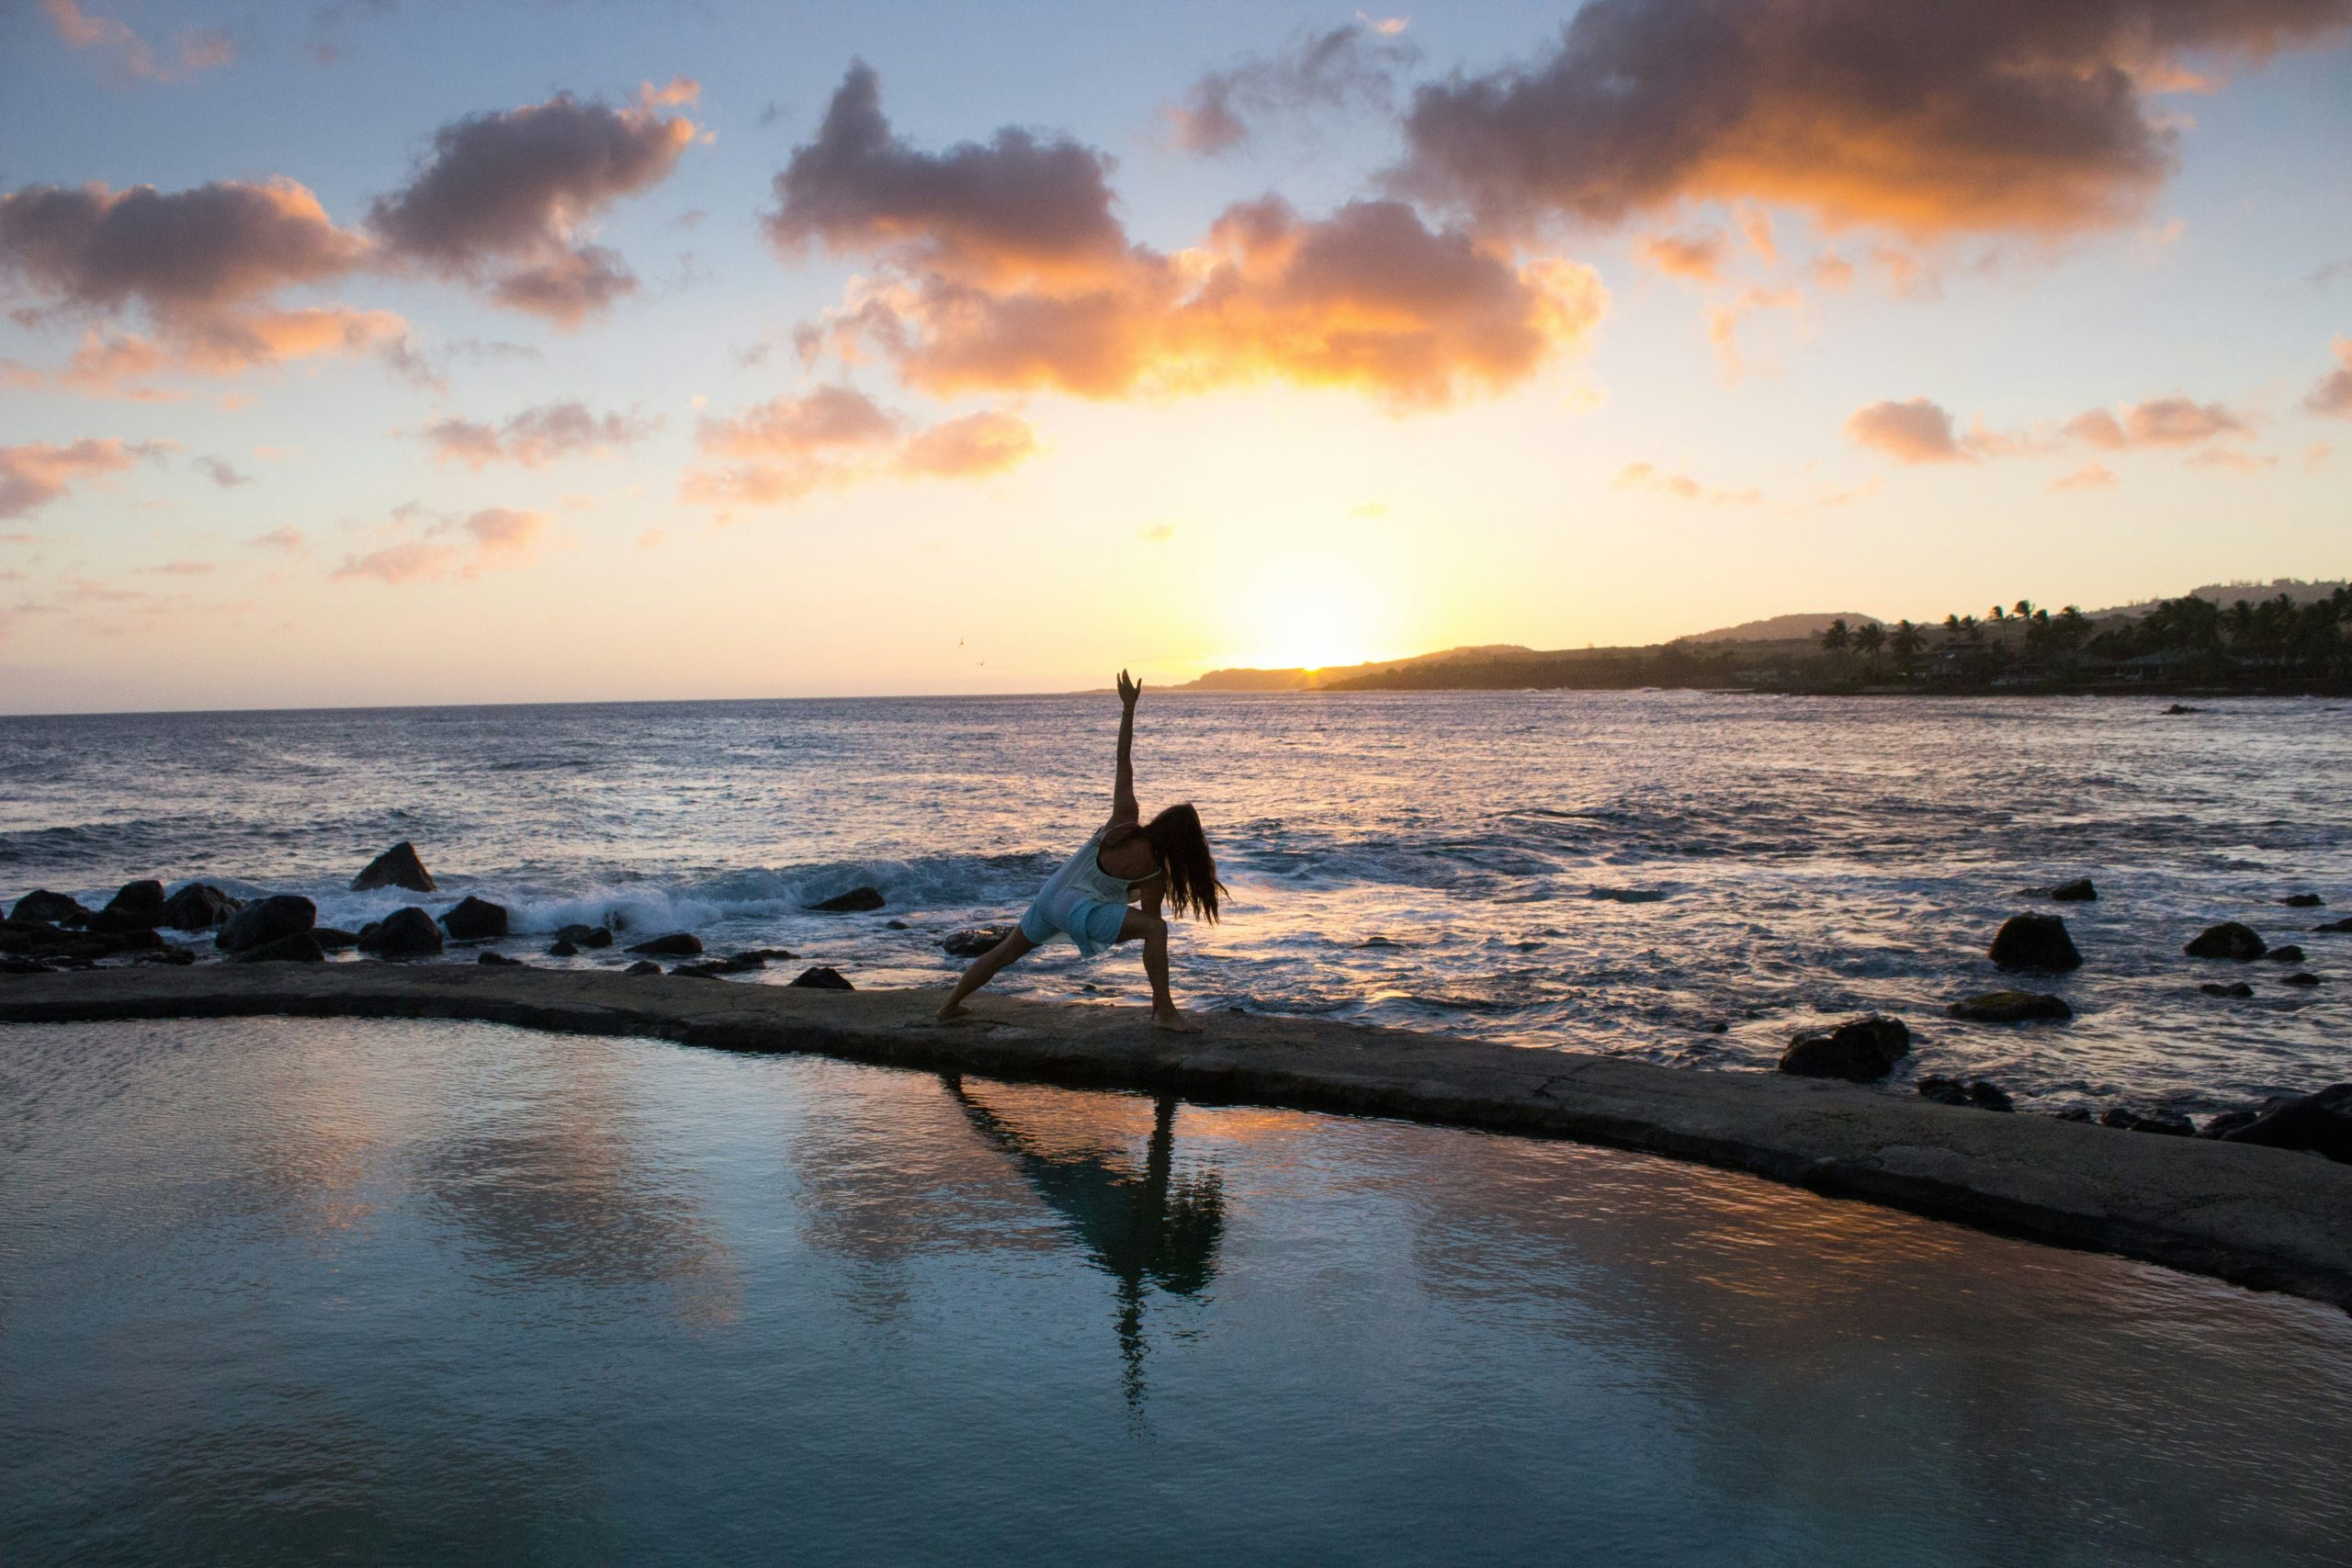 discover rejuvenating wellness retreats for a relaxing and revitalizing experience. unwind, recharge, and find balance at our carefully curated wellness retreats.